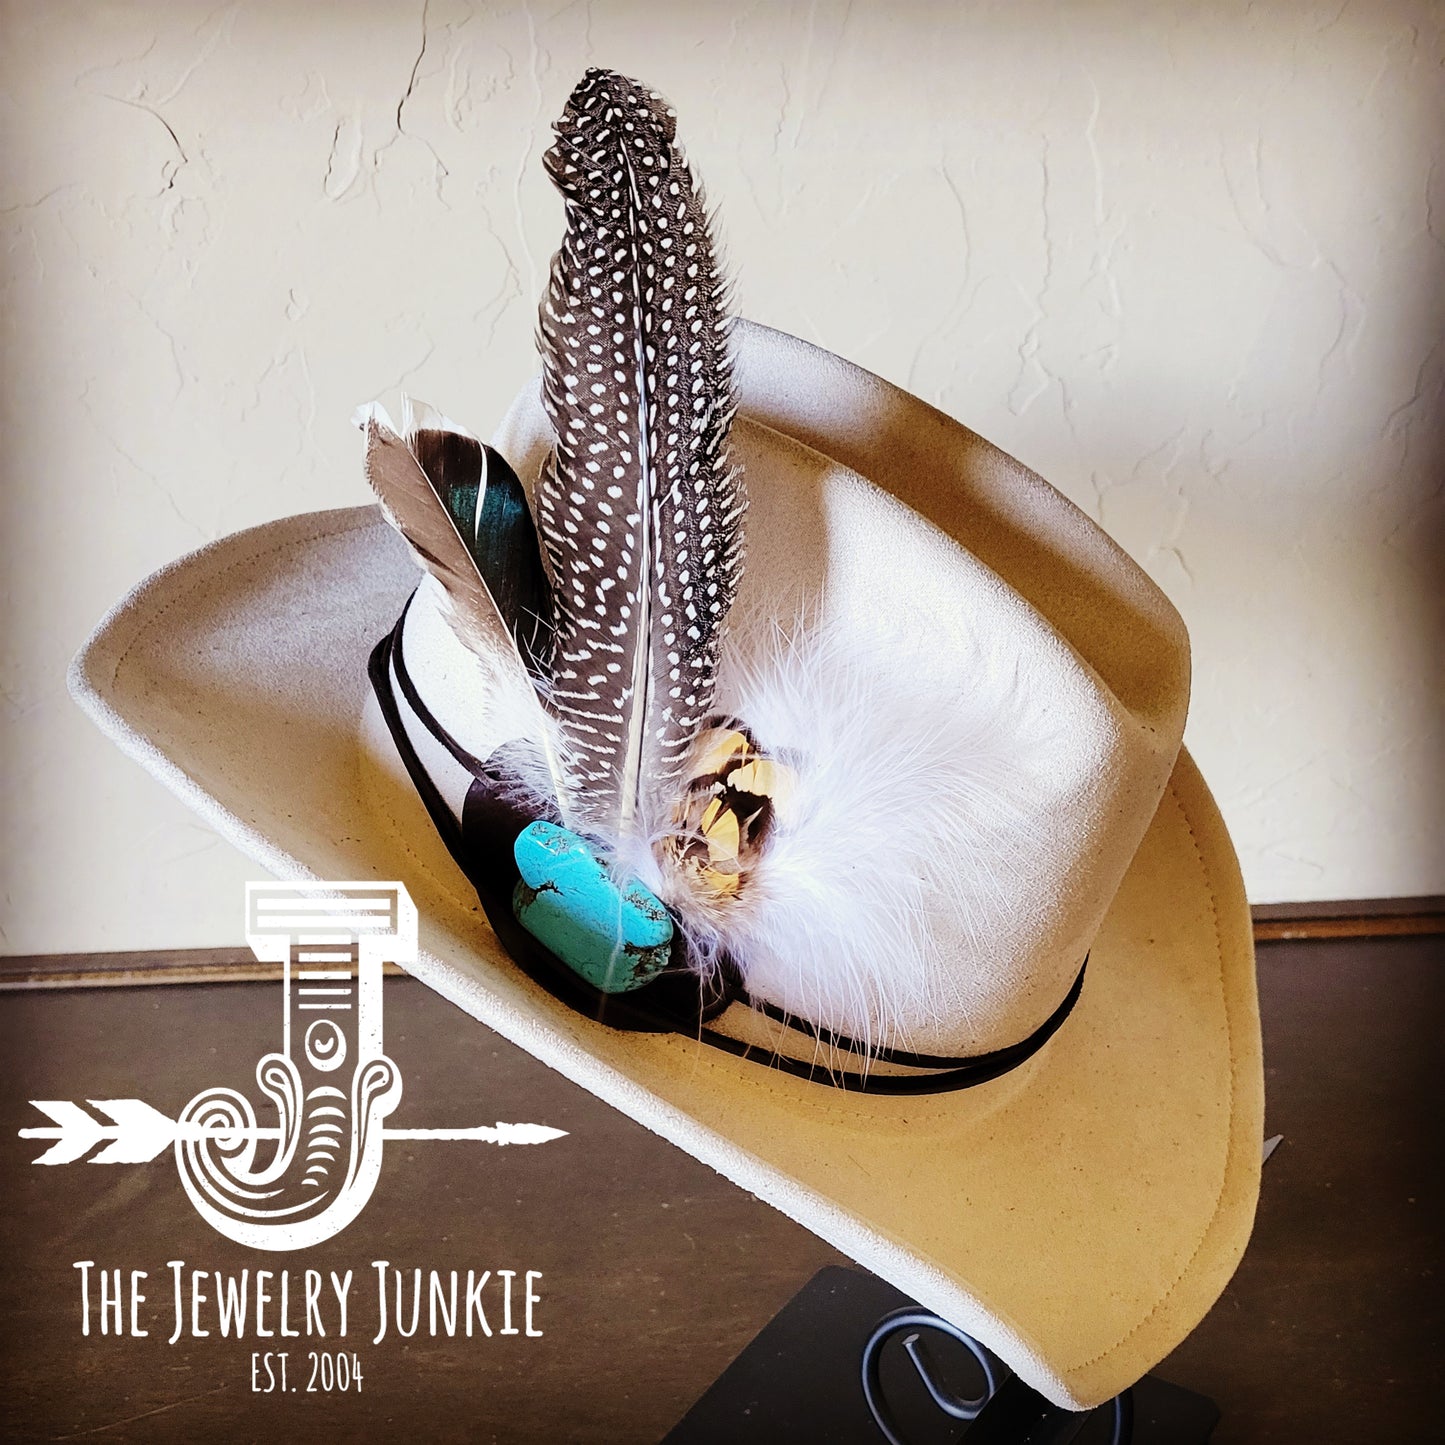 Cowgirl Western Felt Hat w/ Choice of Turquoise Hat Accent-Bone 981k